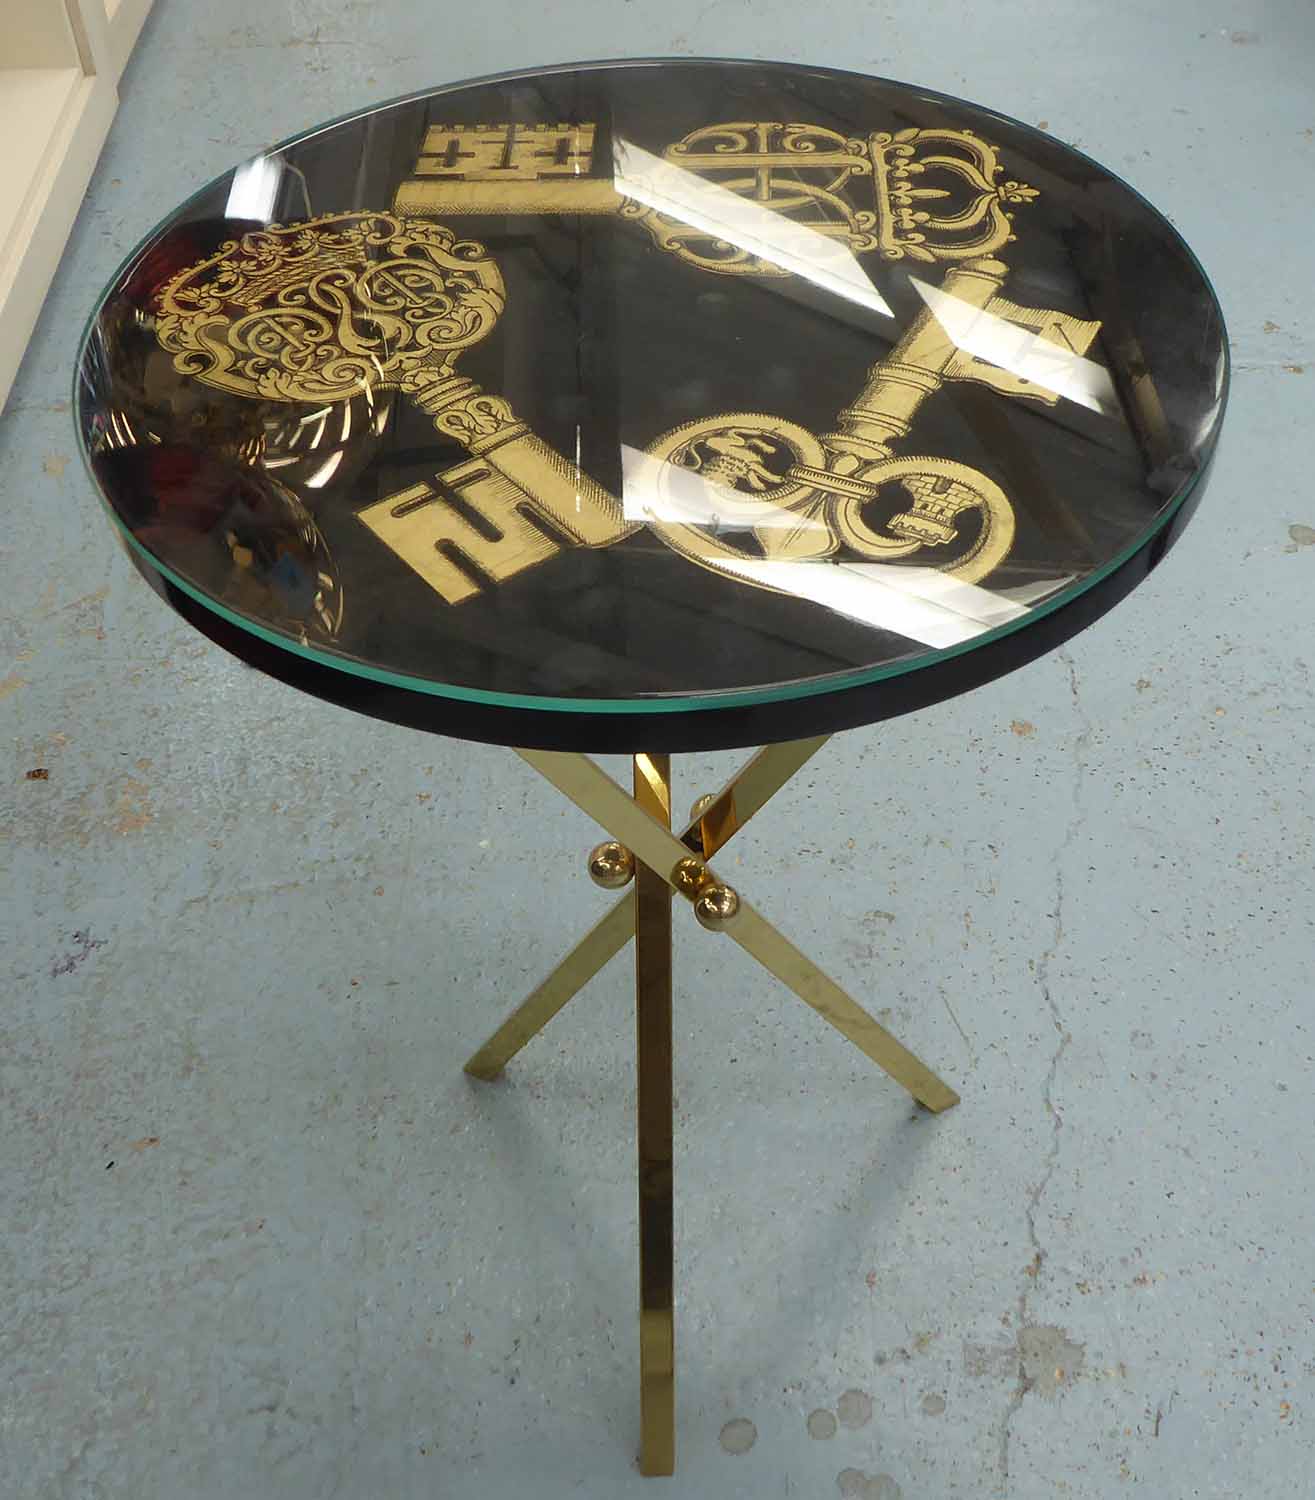 FORNASETTI 'KEYS' OCCASIONAL TABLE, lacquered top on brass base.